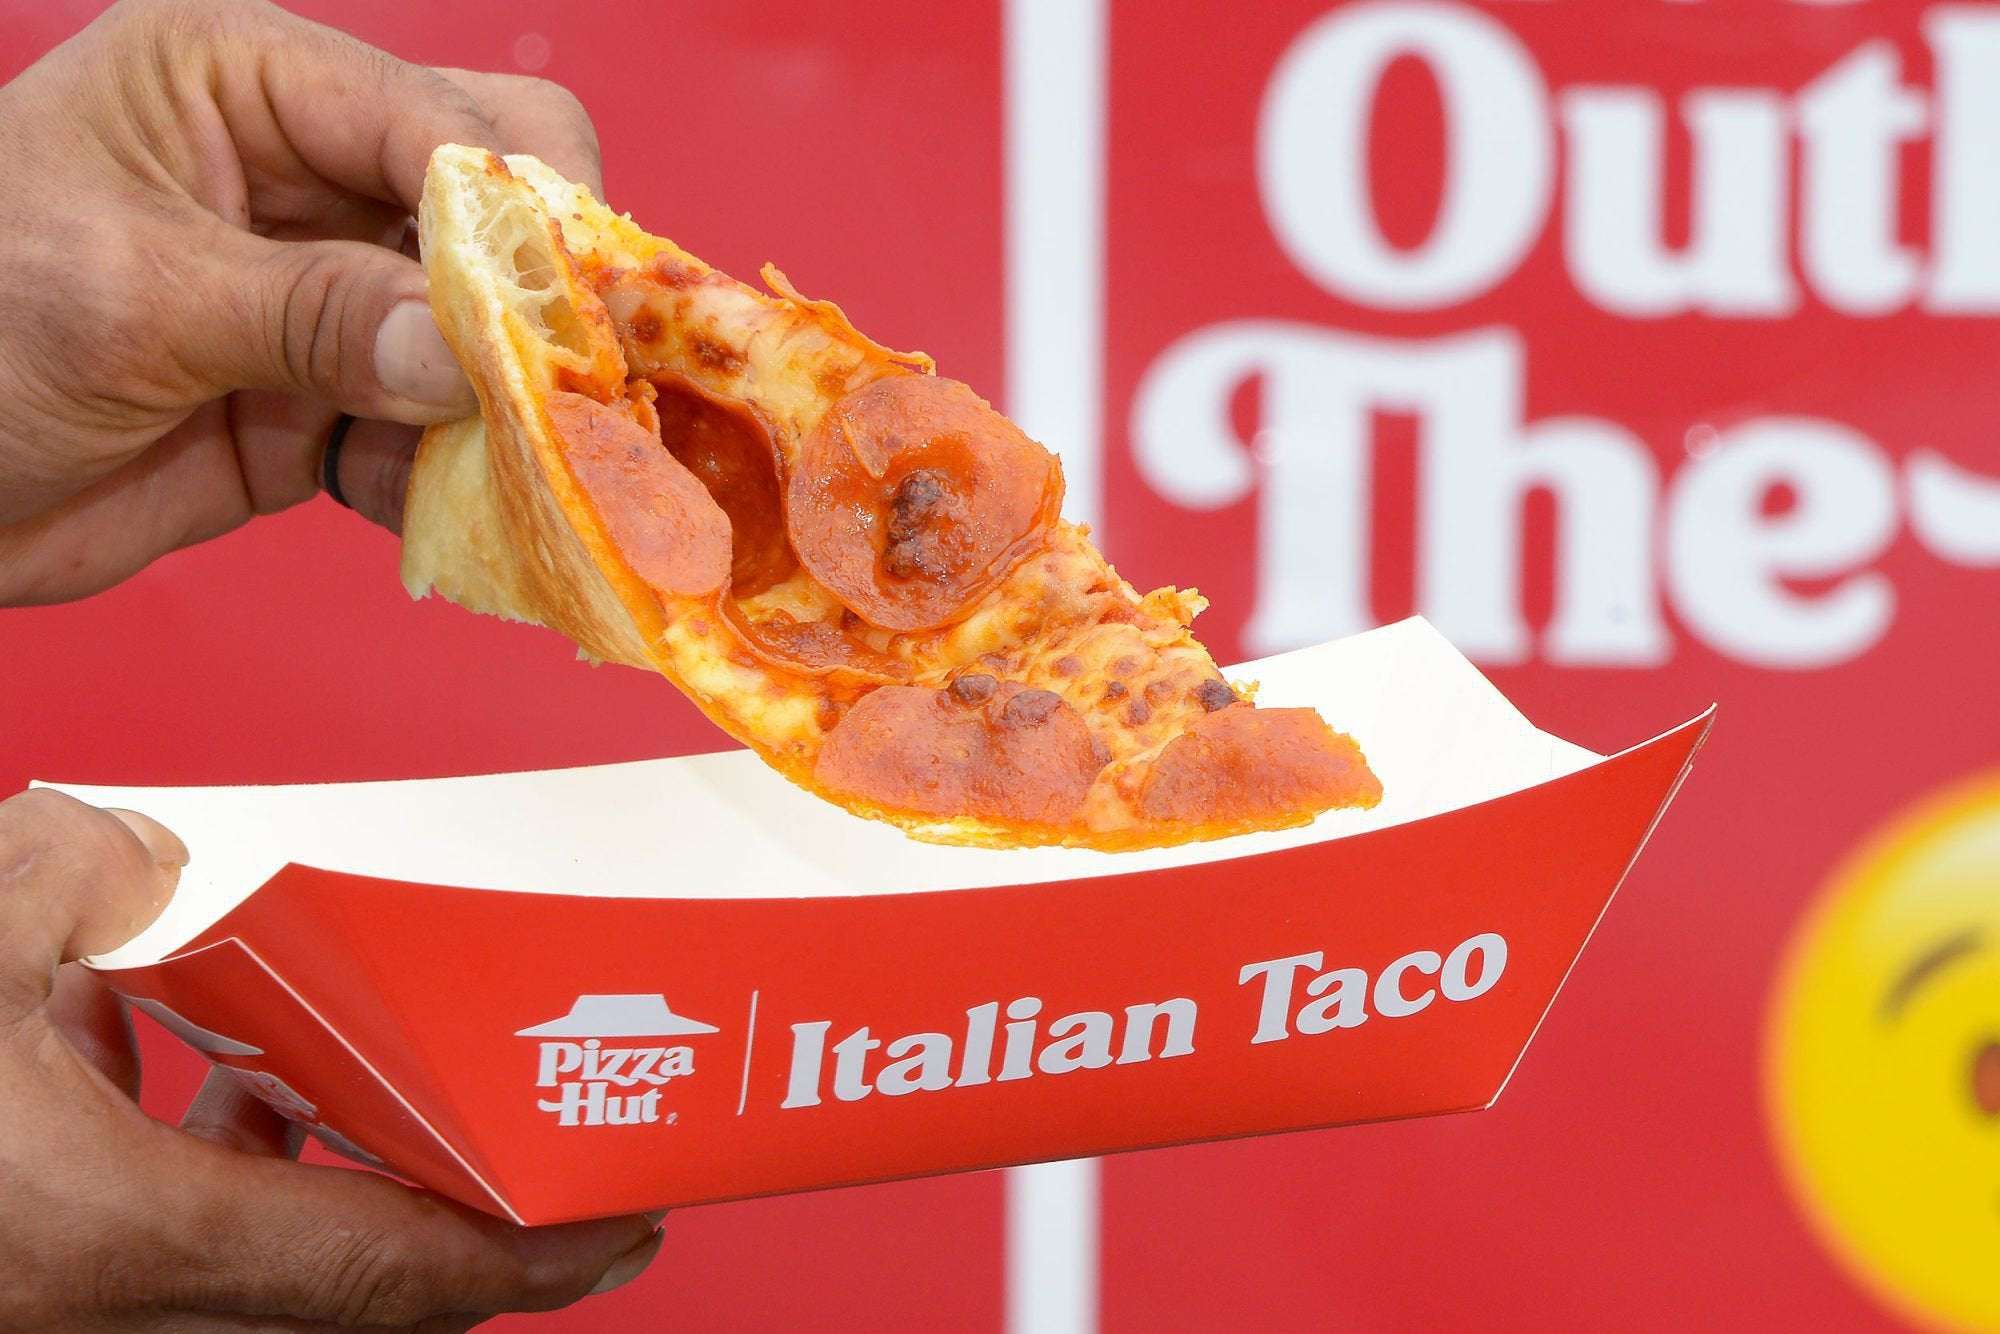 image for Pizza Hut Invents 'Italian Taco' to Take on Taco Bell's Mexican Pizza